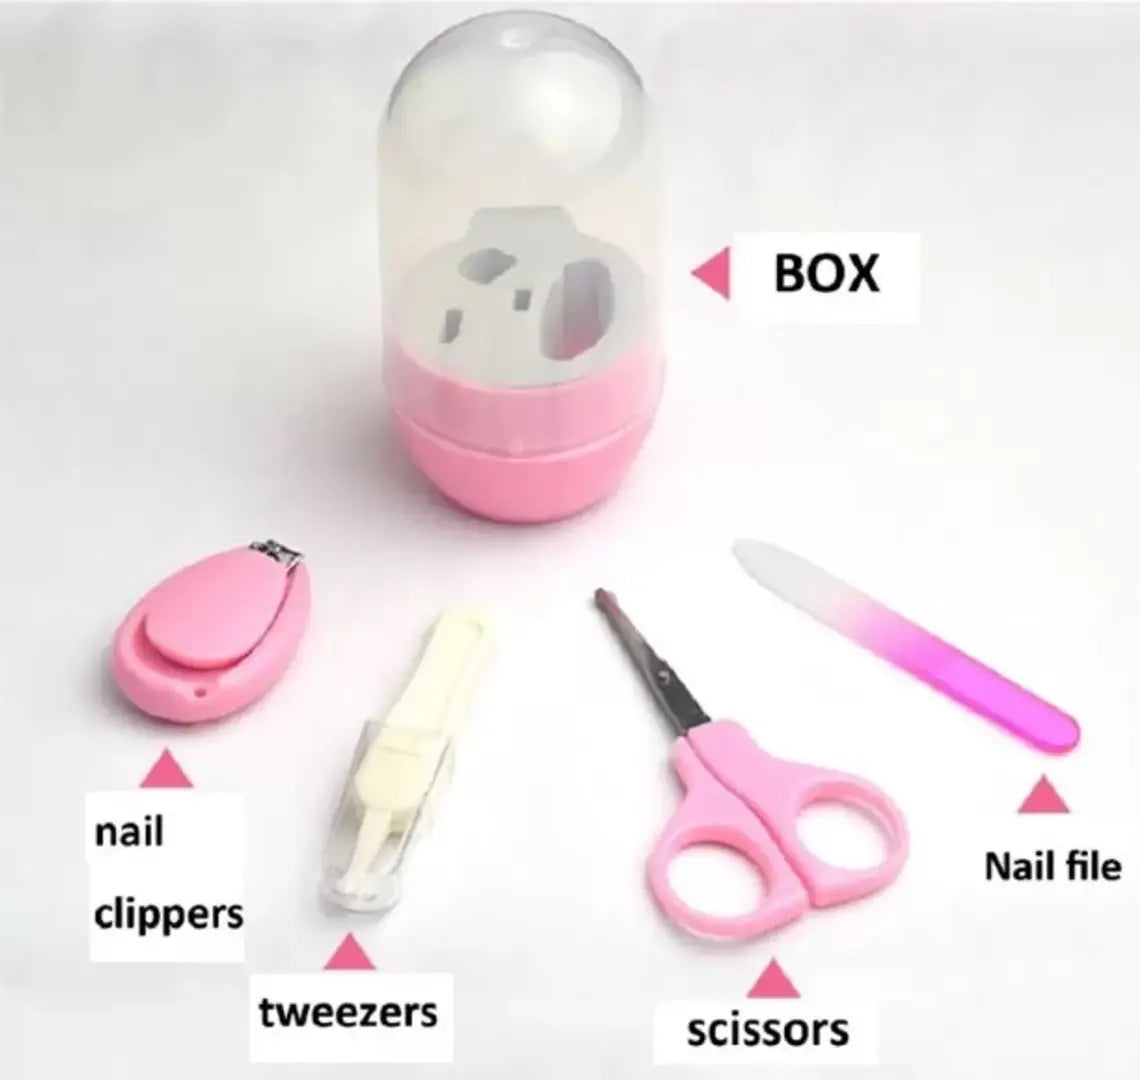 New born Baby Clipper kits/ Nail Cutter safety Cutter toddler infant Scissor manicure care ( 4 in 1 set)